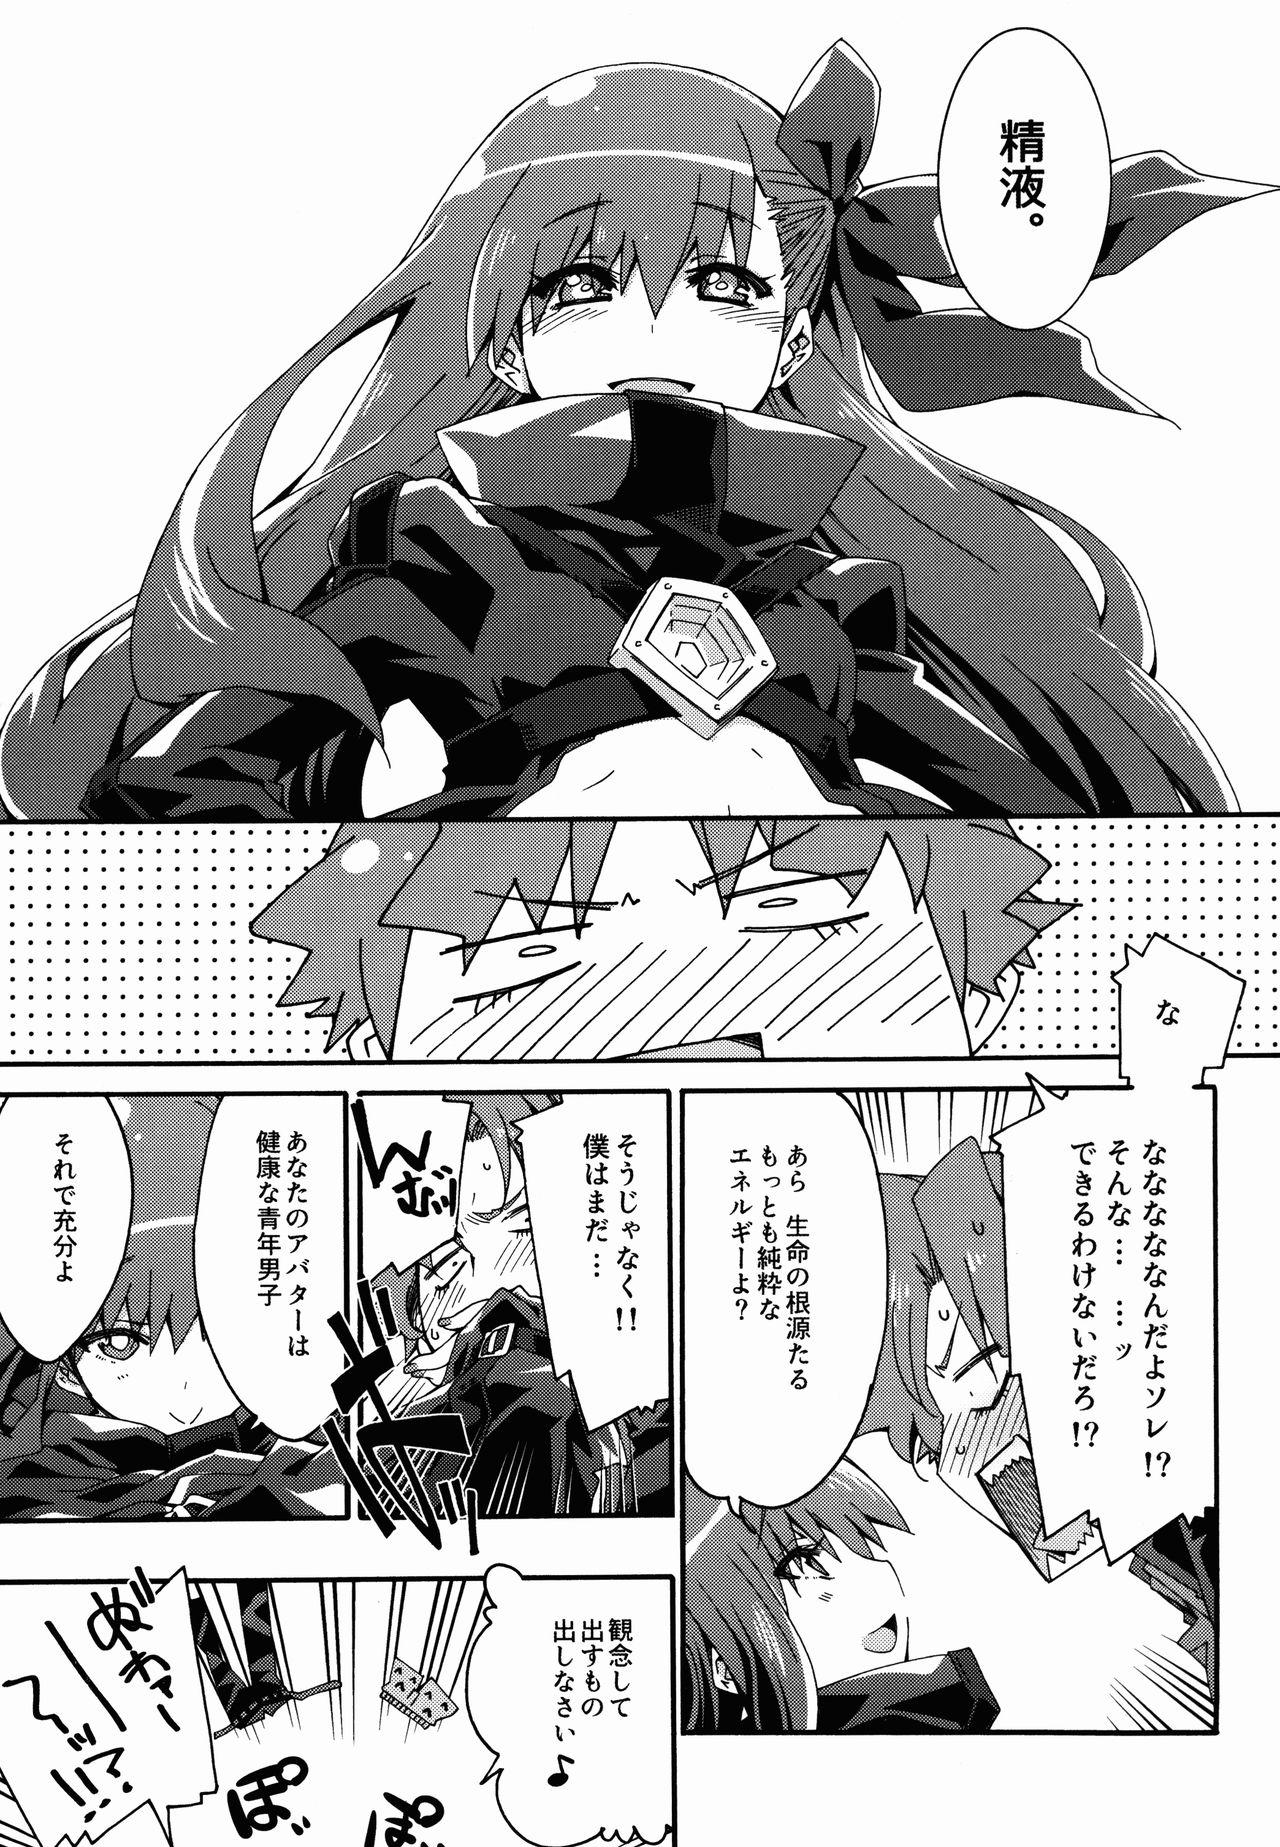 Hottie Melty/kiss - Fate extra Jacking Off - Page 11